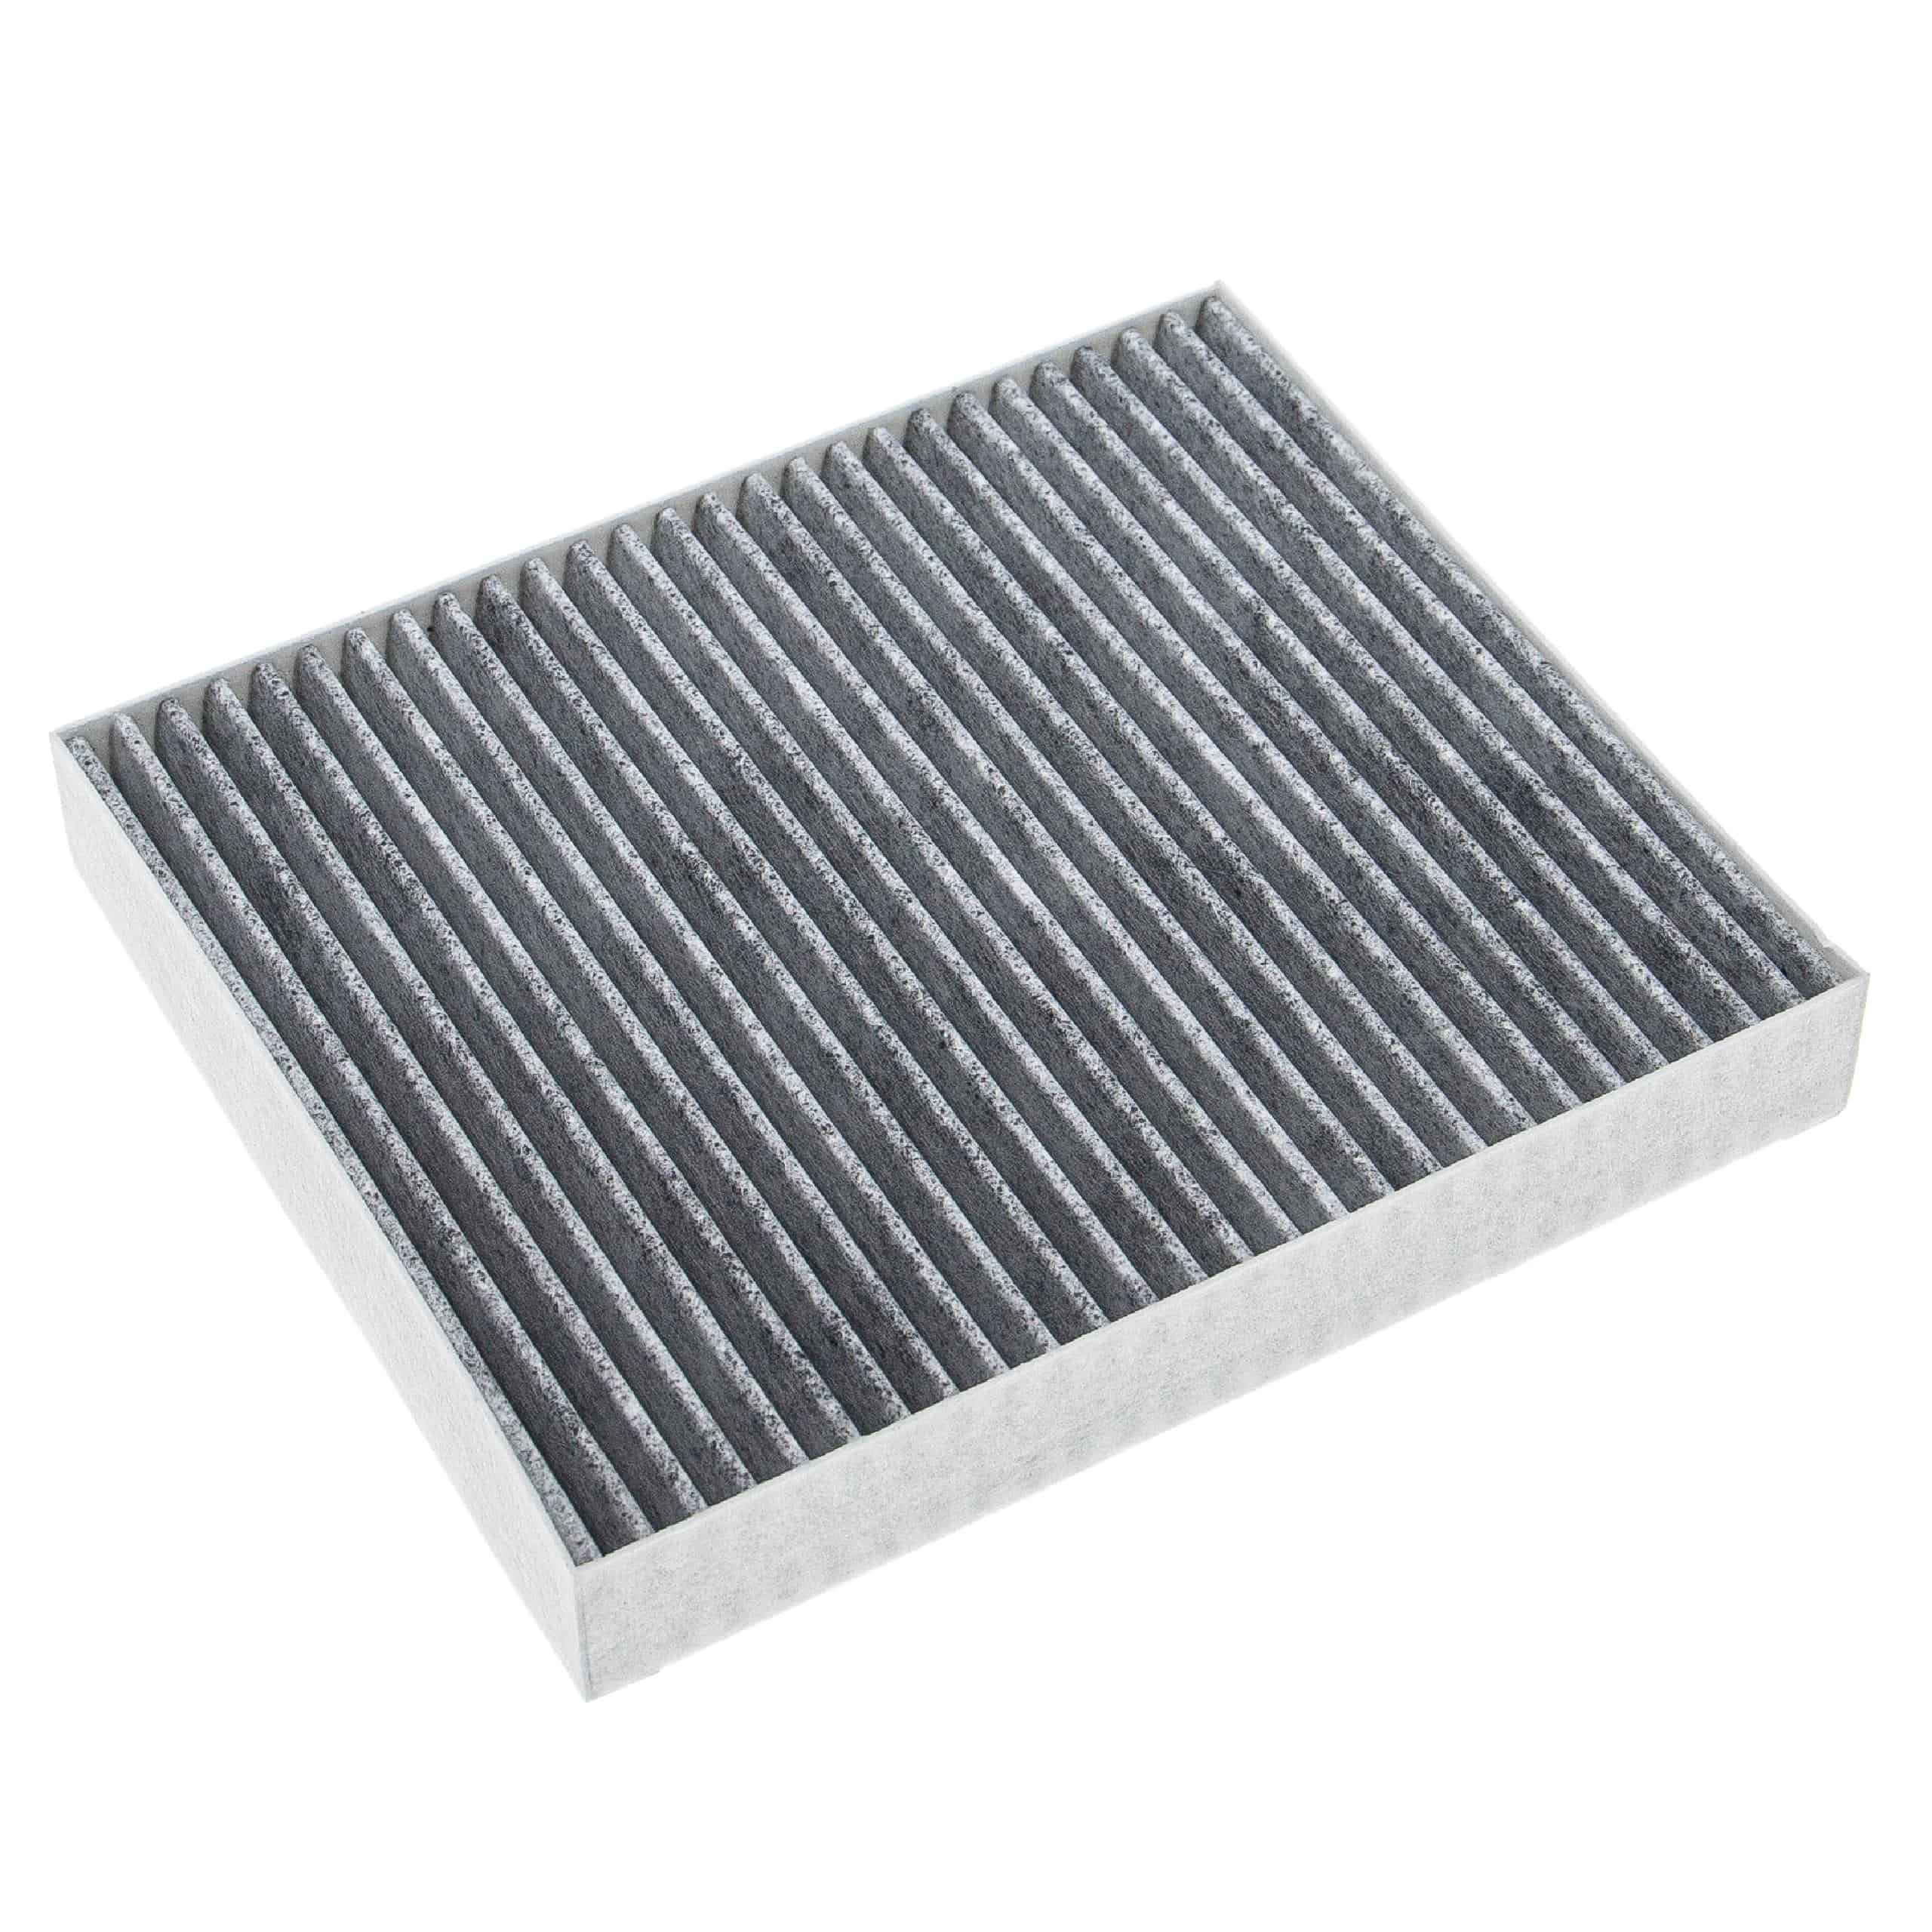 Cabin Air Filter replaces Comline EKF161A